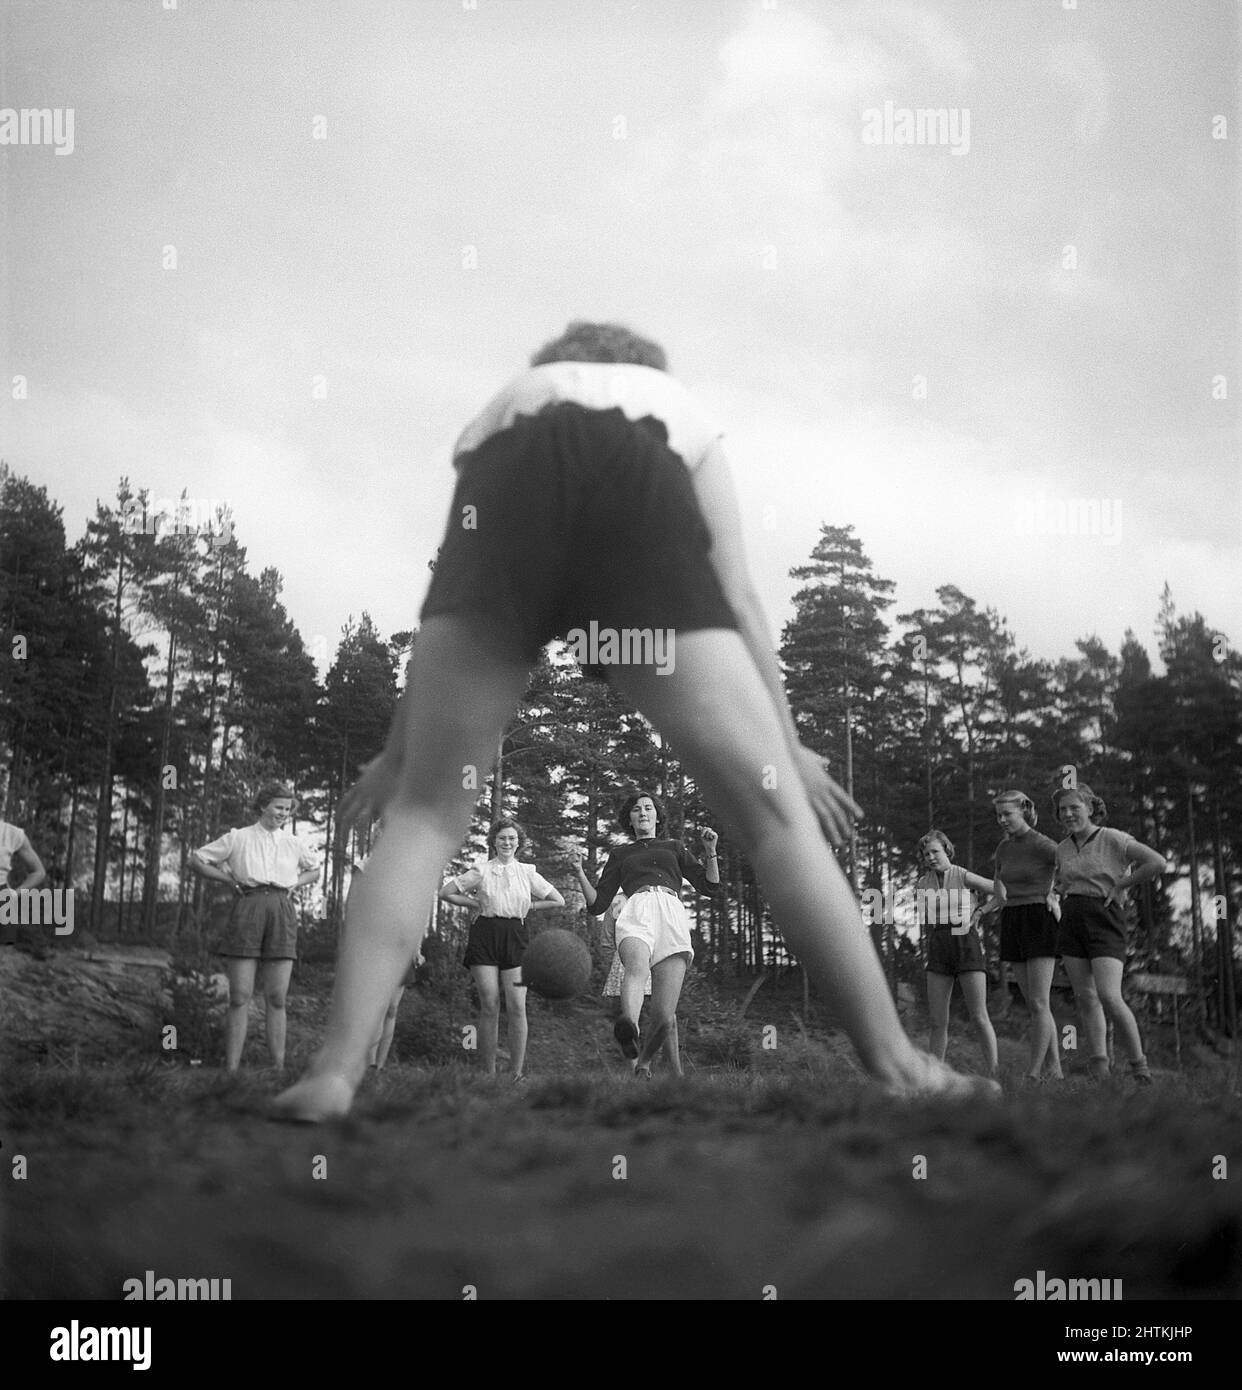 In the 1950s. A women's soccer team during practise. One by one they shoot the ball at the goalkeeper who is pictured from behind. Sweden 1951 Kristoffersson BE37-10 Stock Photo